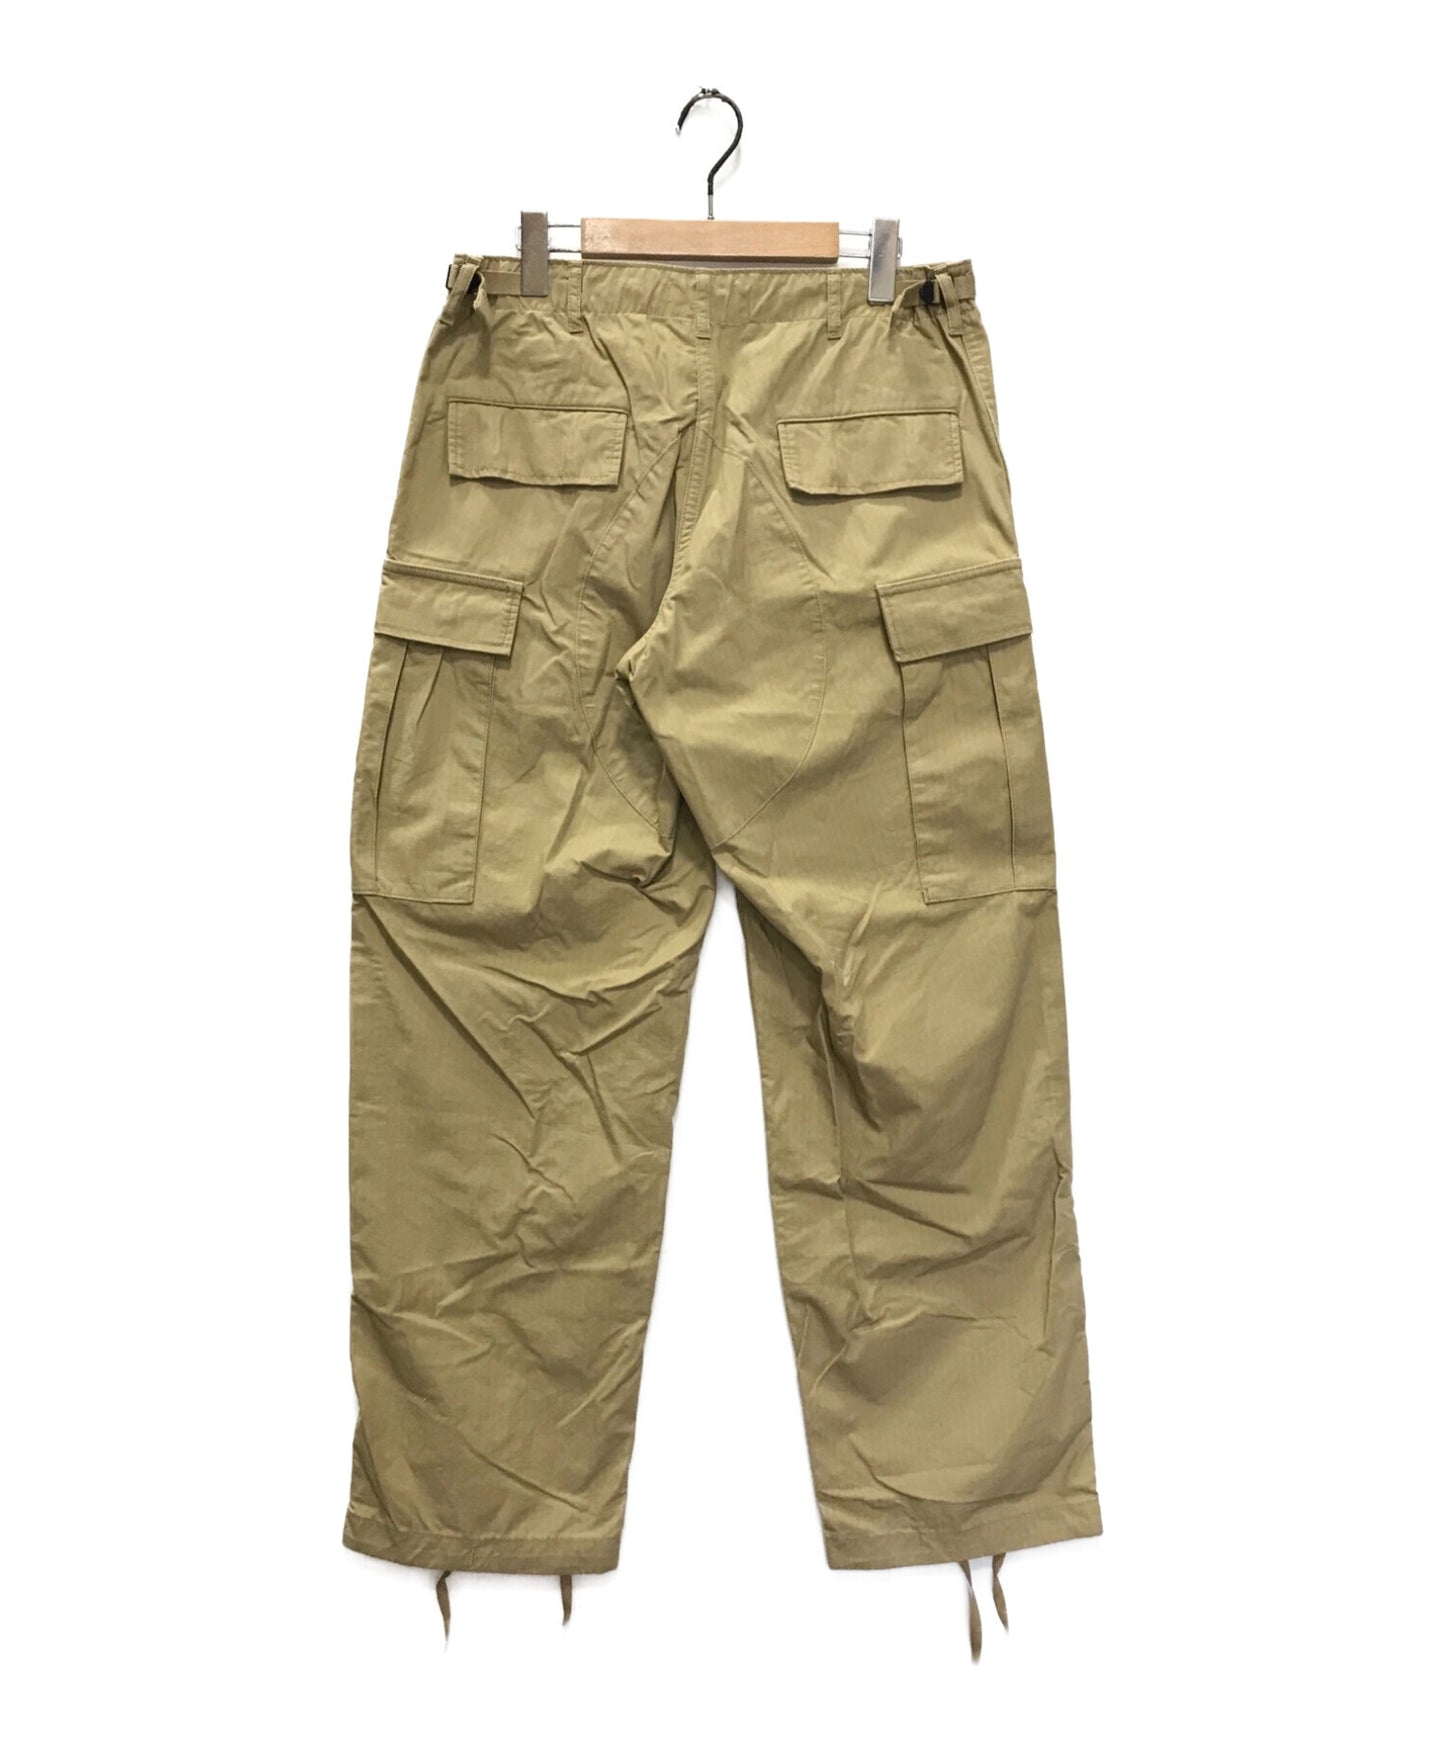 WTAPS RIPSTOP CARGO PANTS WVDT-PTM02 | Archive Factory